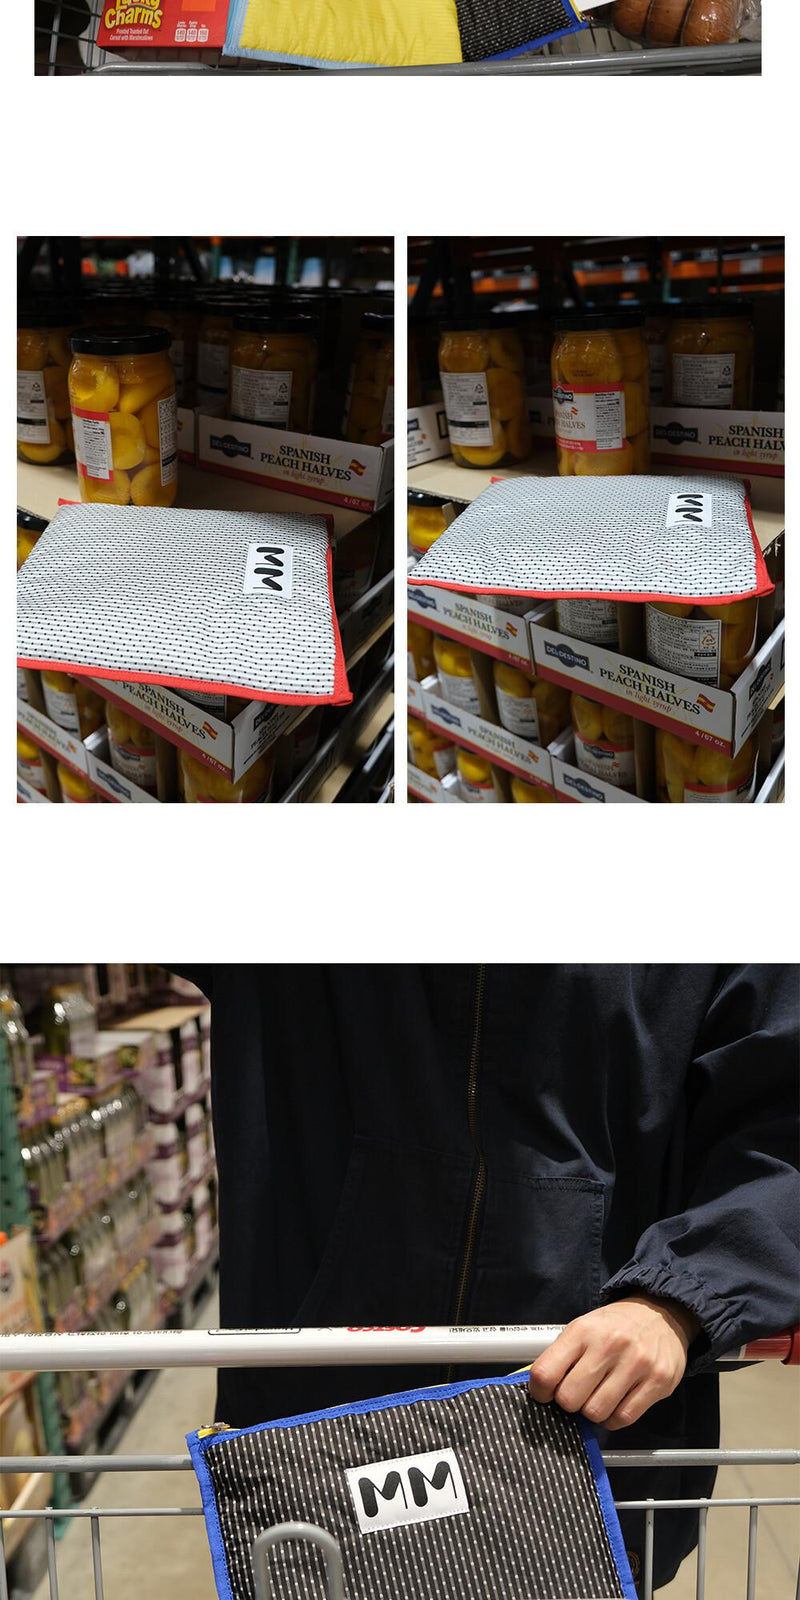 [ORDINARY PLUS] Fluffy Shield For IPad Pouch White&amp;Red